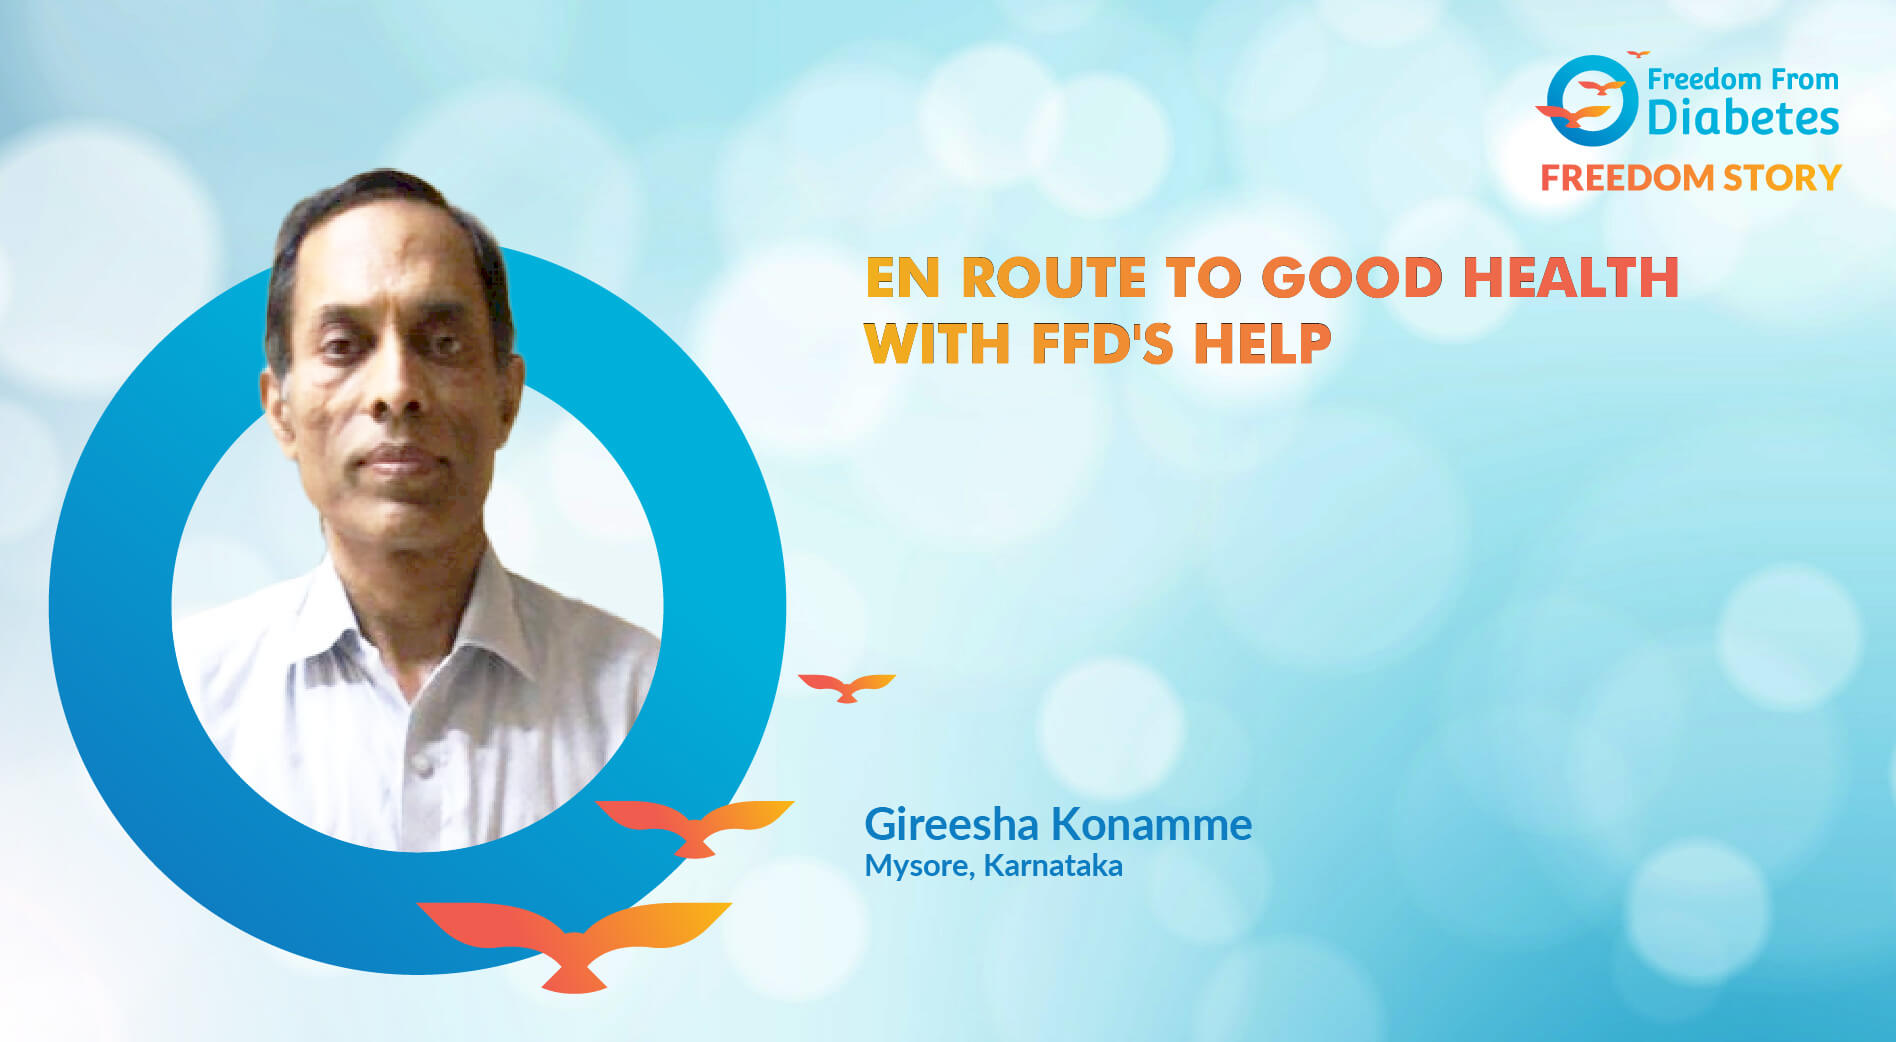 24 years of diabetes control with FFD's help